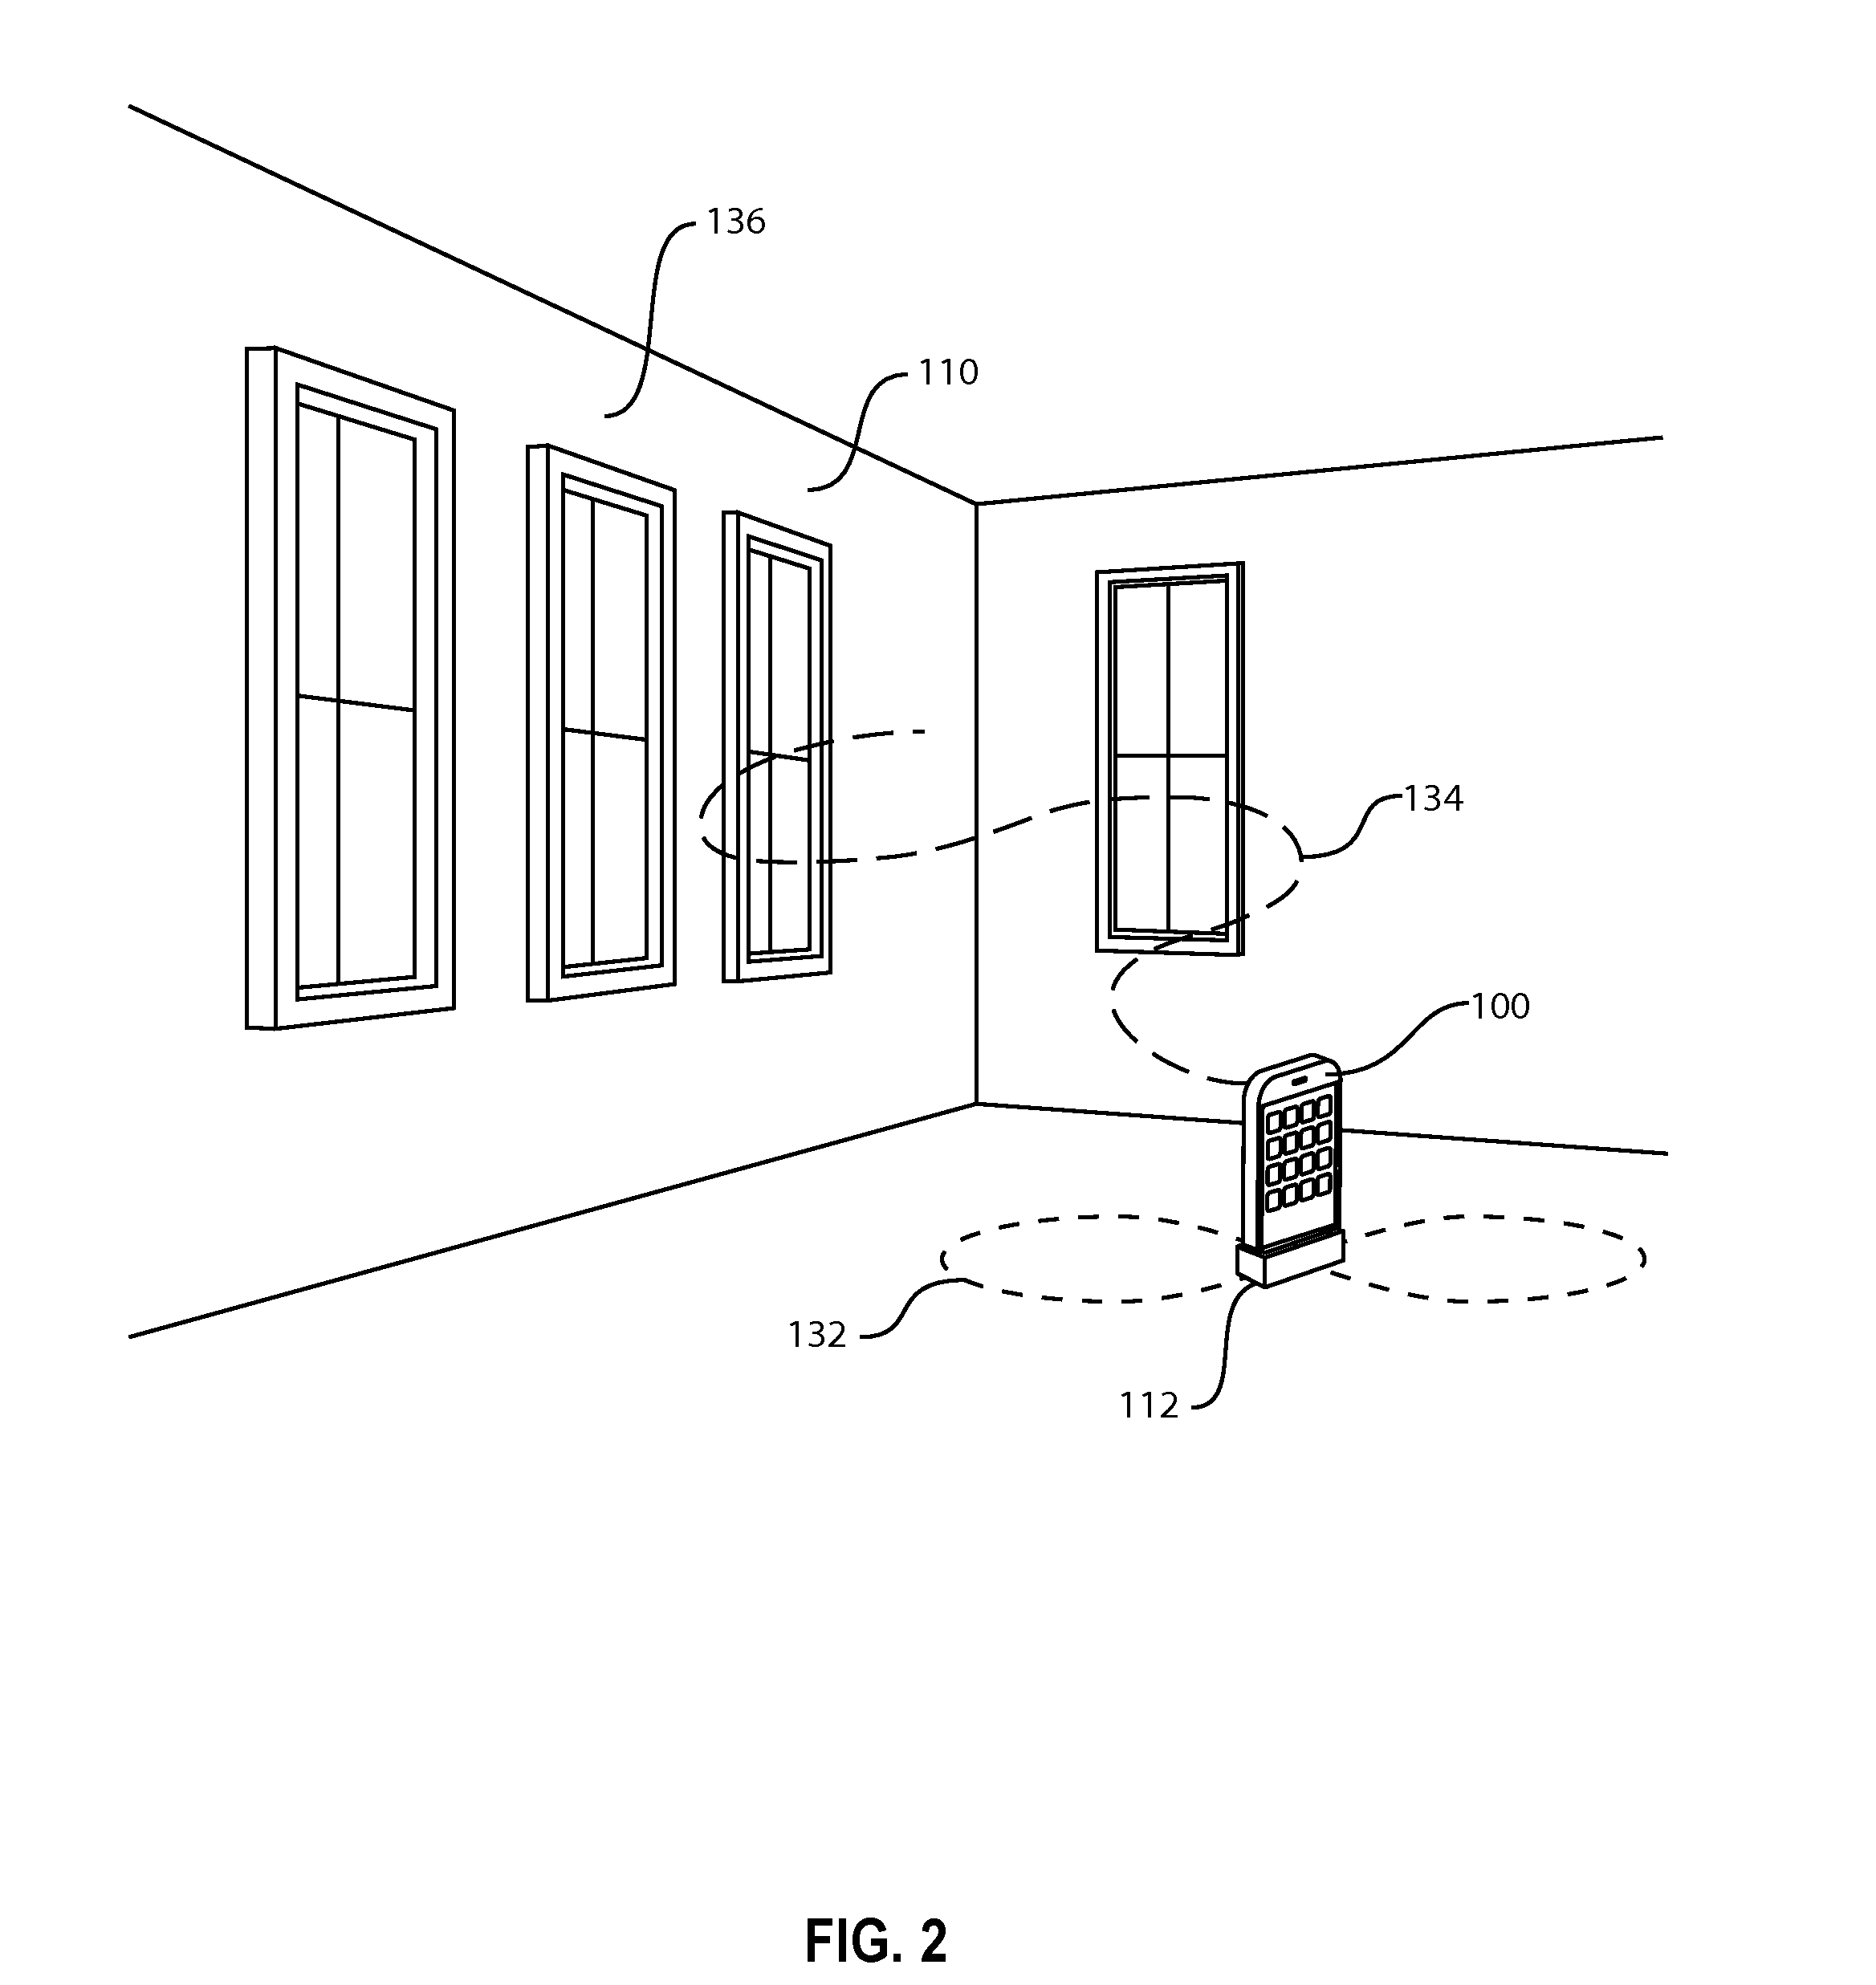 Method and system for 3D capture based on structure from motion with pose detection tool